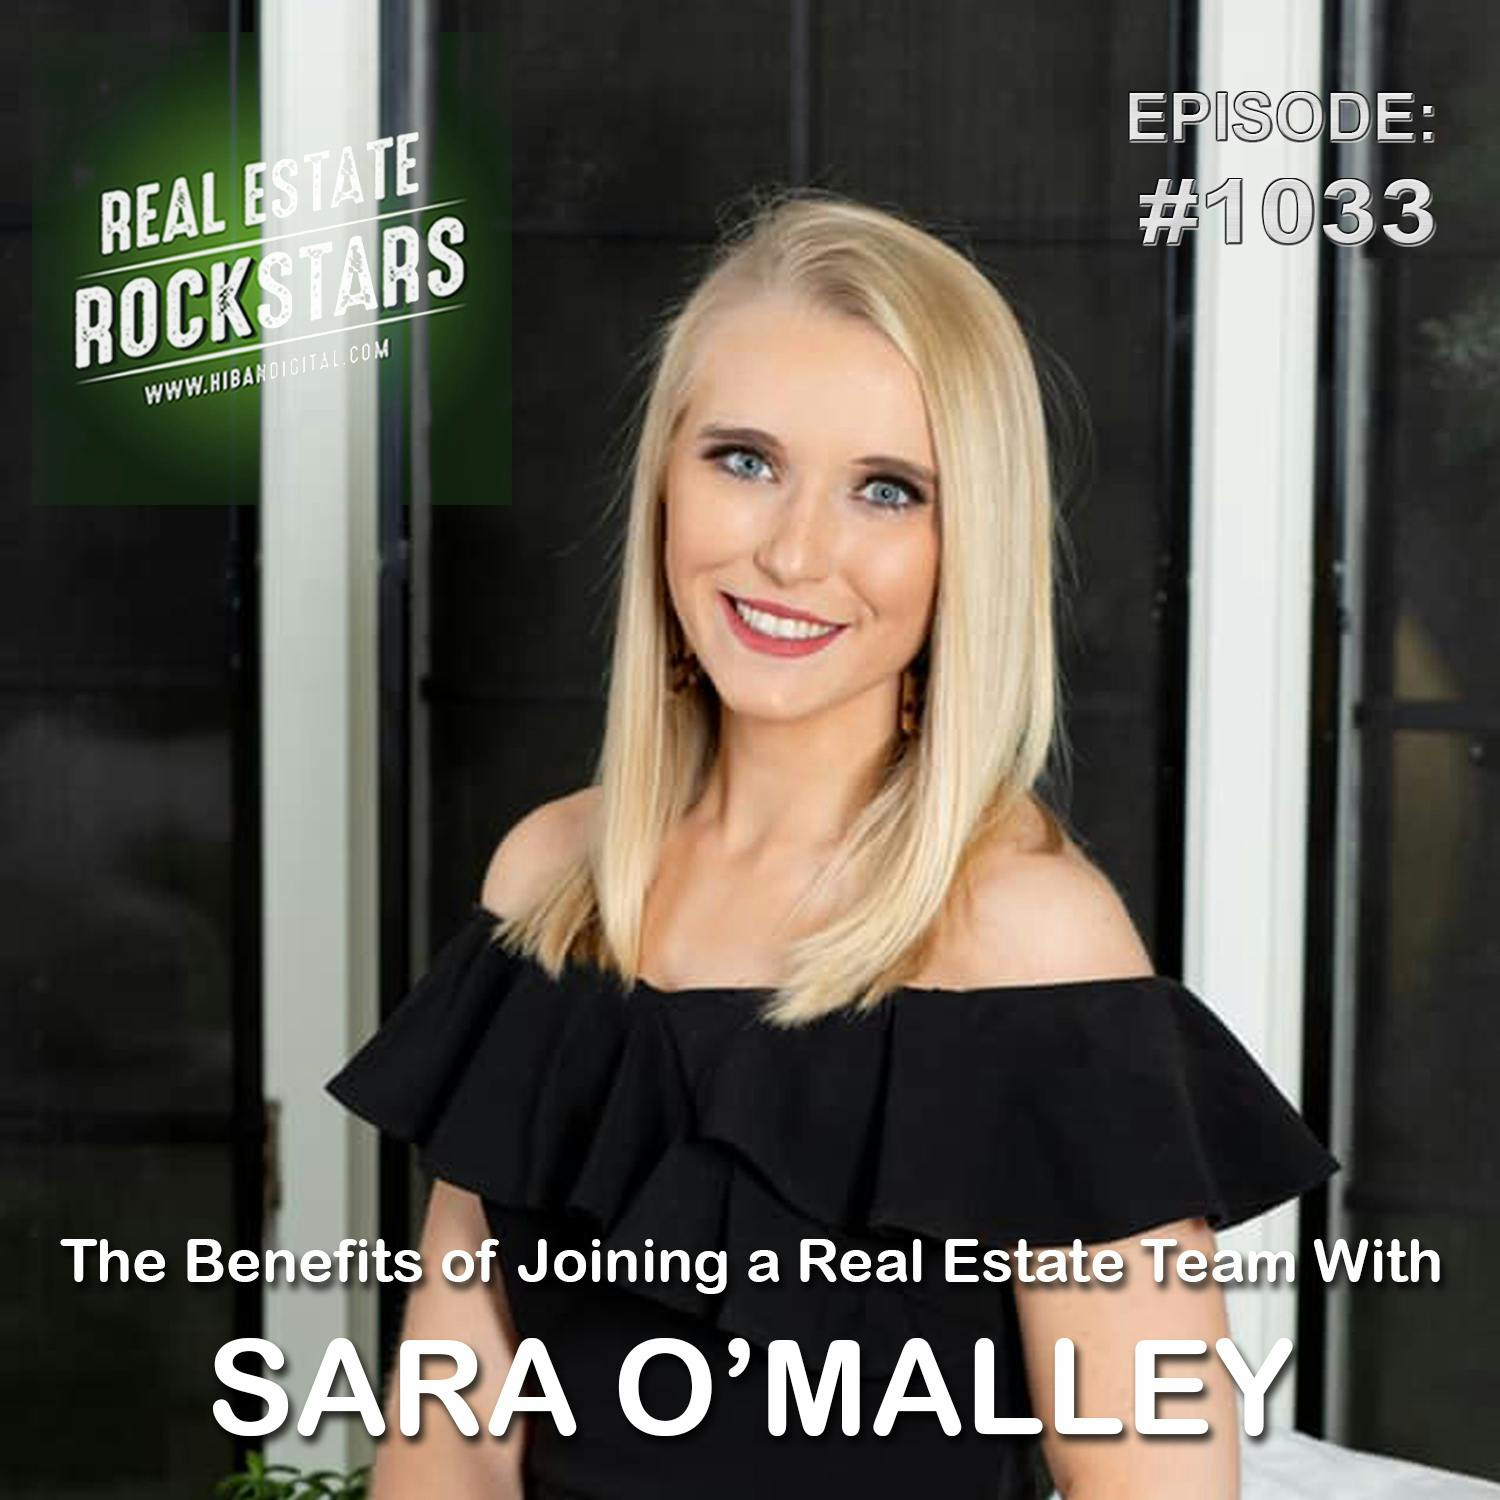 1033: The Benefits of Joining a Real Estate Team With Sara O’Malley